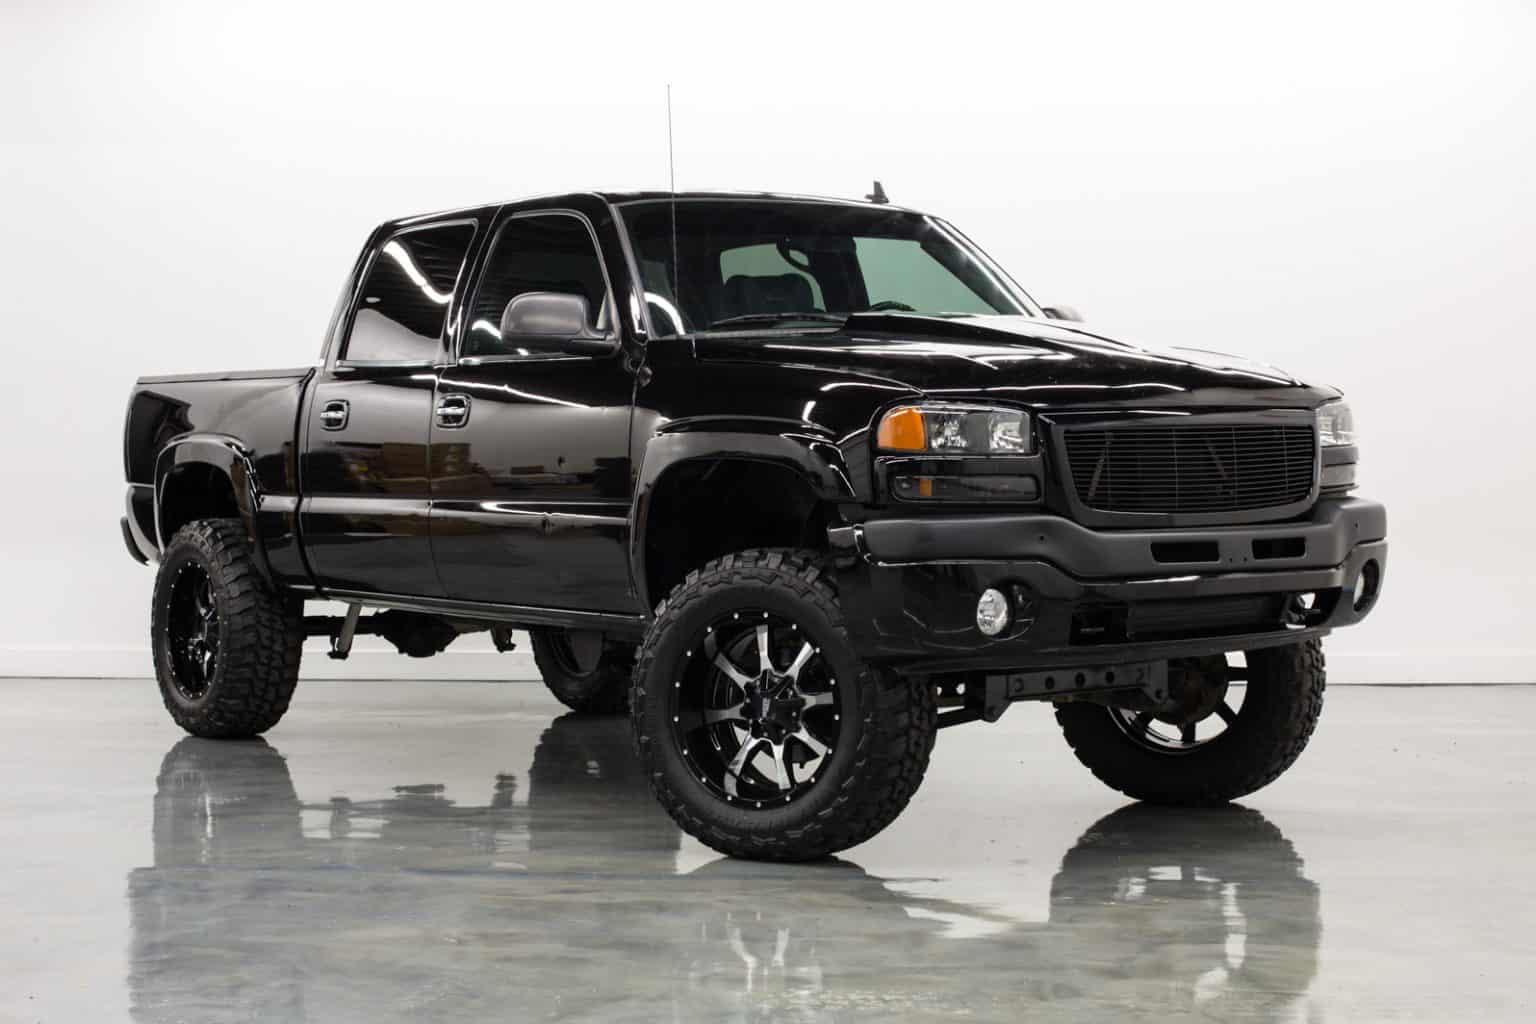 Michigan Lifted Trucks for Sale